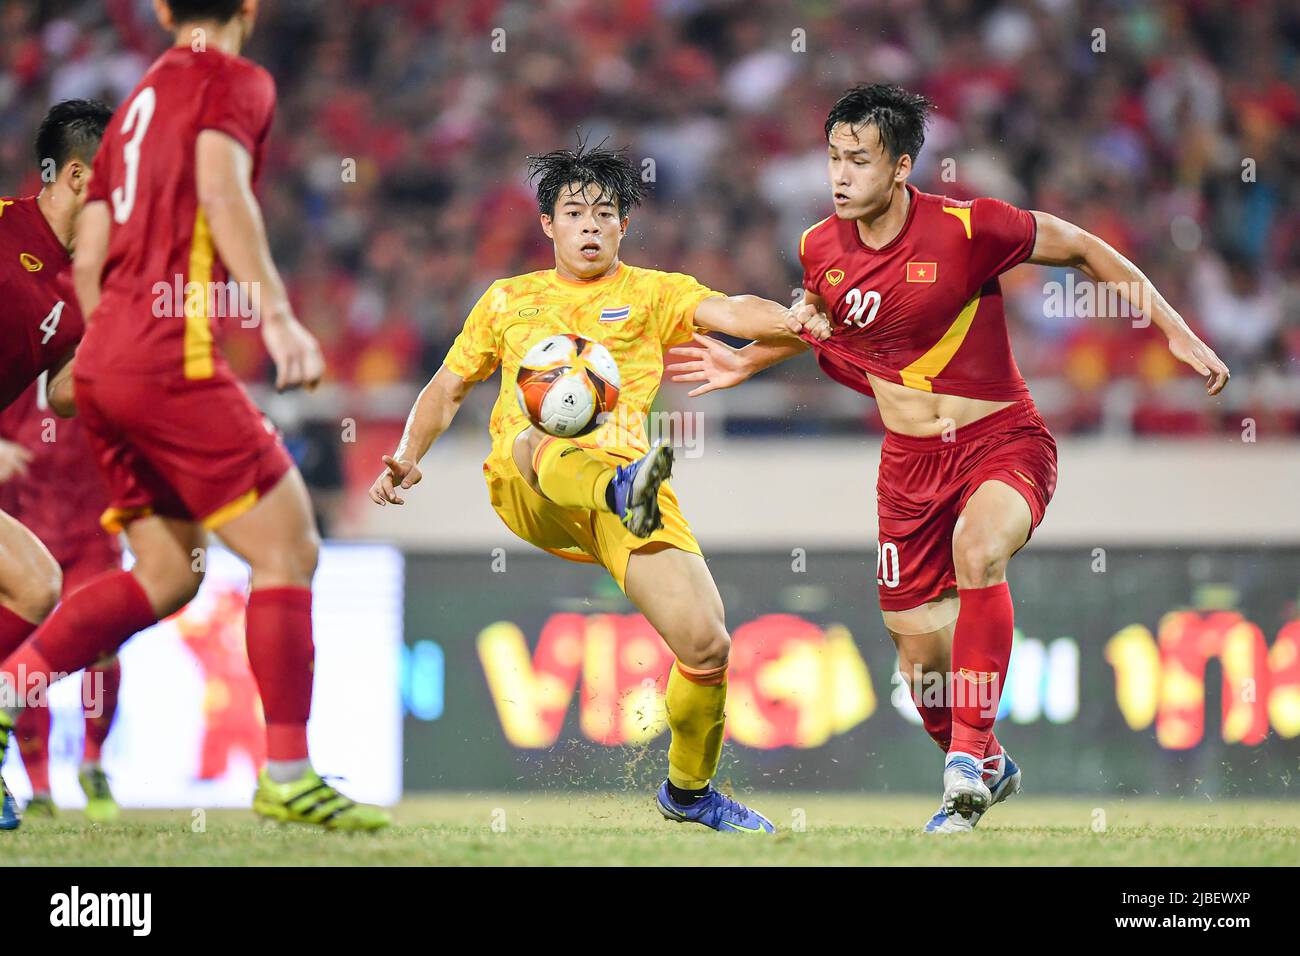 Ekanit Panya (L) of Thailand and Anh Bui Hoang Viet (R) of Vietnam in action during the Sea Games 2022 match between Thailand and Vietnam at My Dinh National Stadium. Final score; Thailand 0:1 Vietnam. Stock Photo